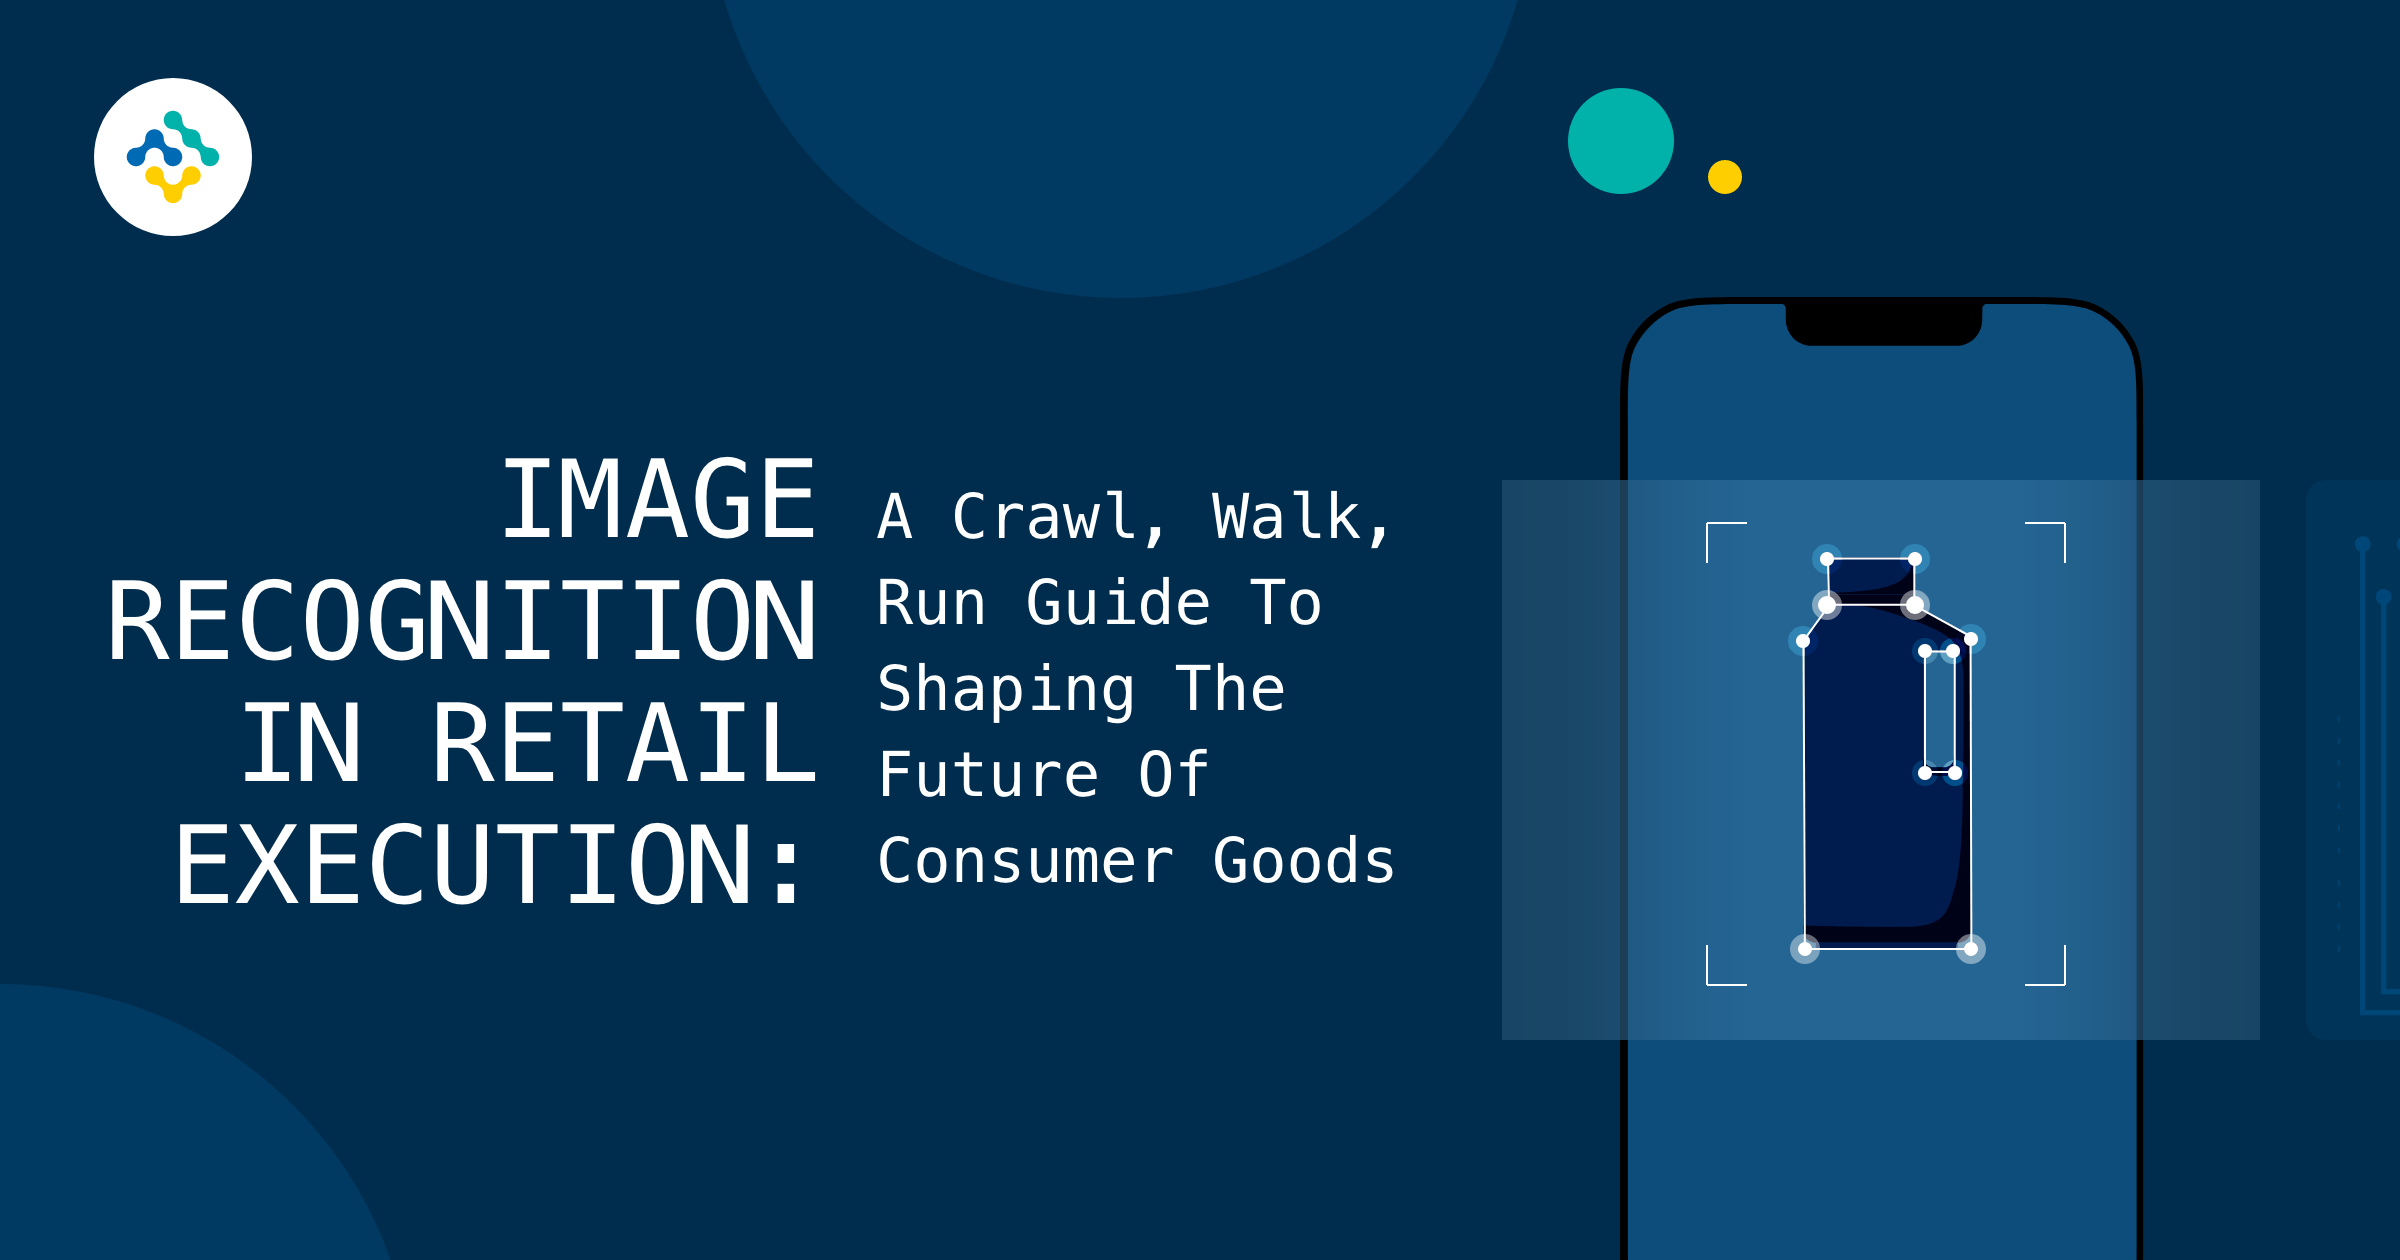 A Crawl, Walk, Run Guide to Shaping the Future of Consumer Goods